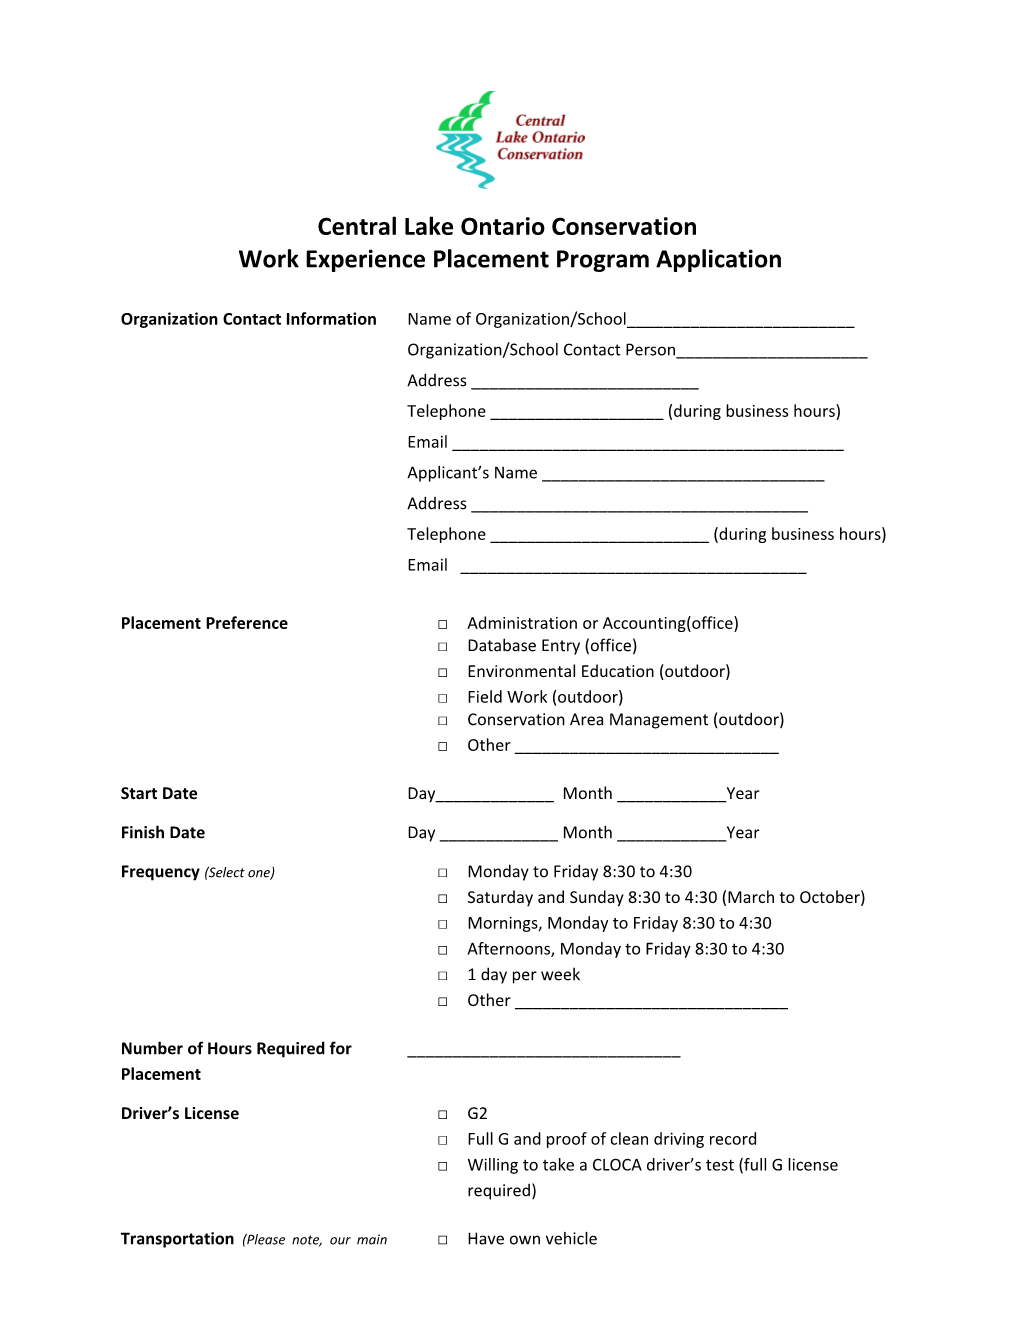 Work Experience Placement Program Application